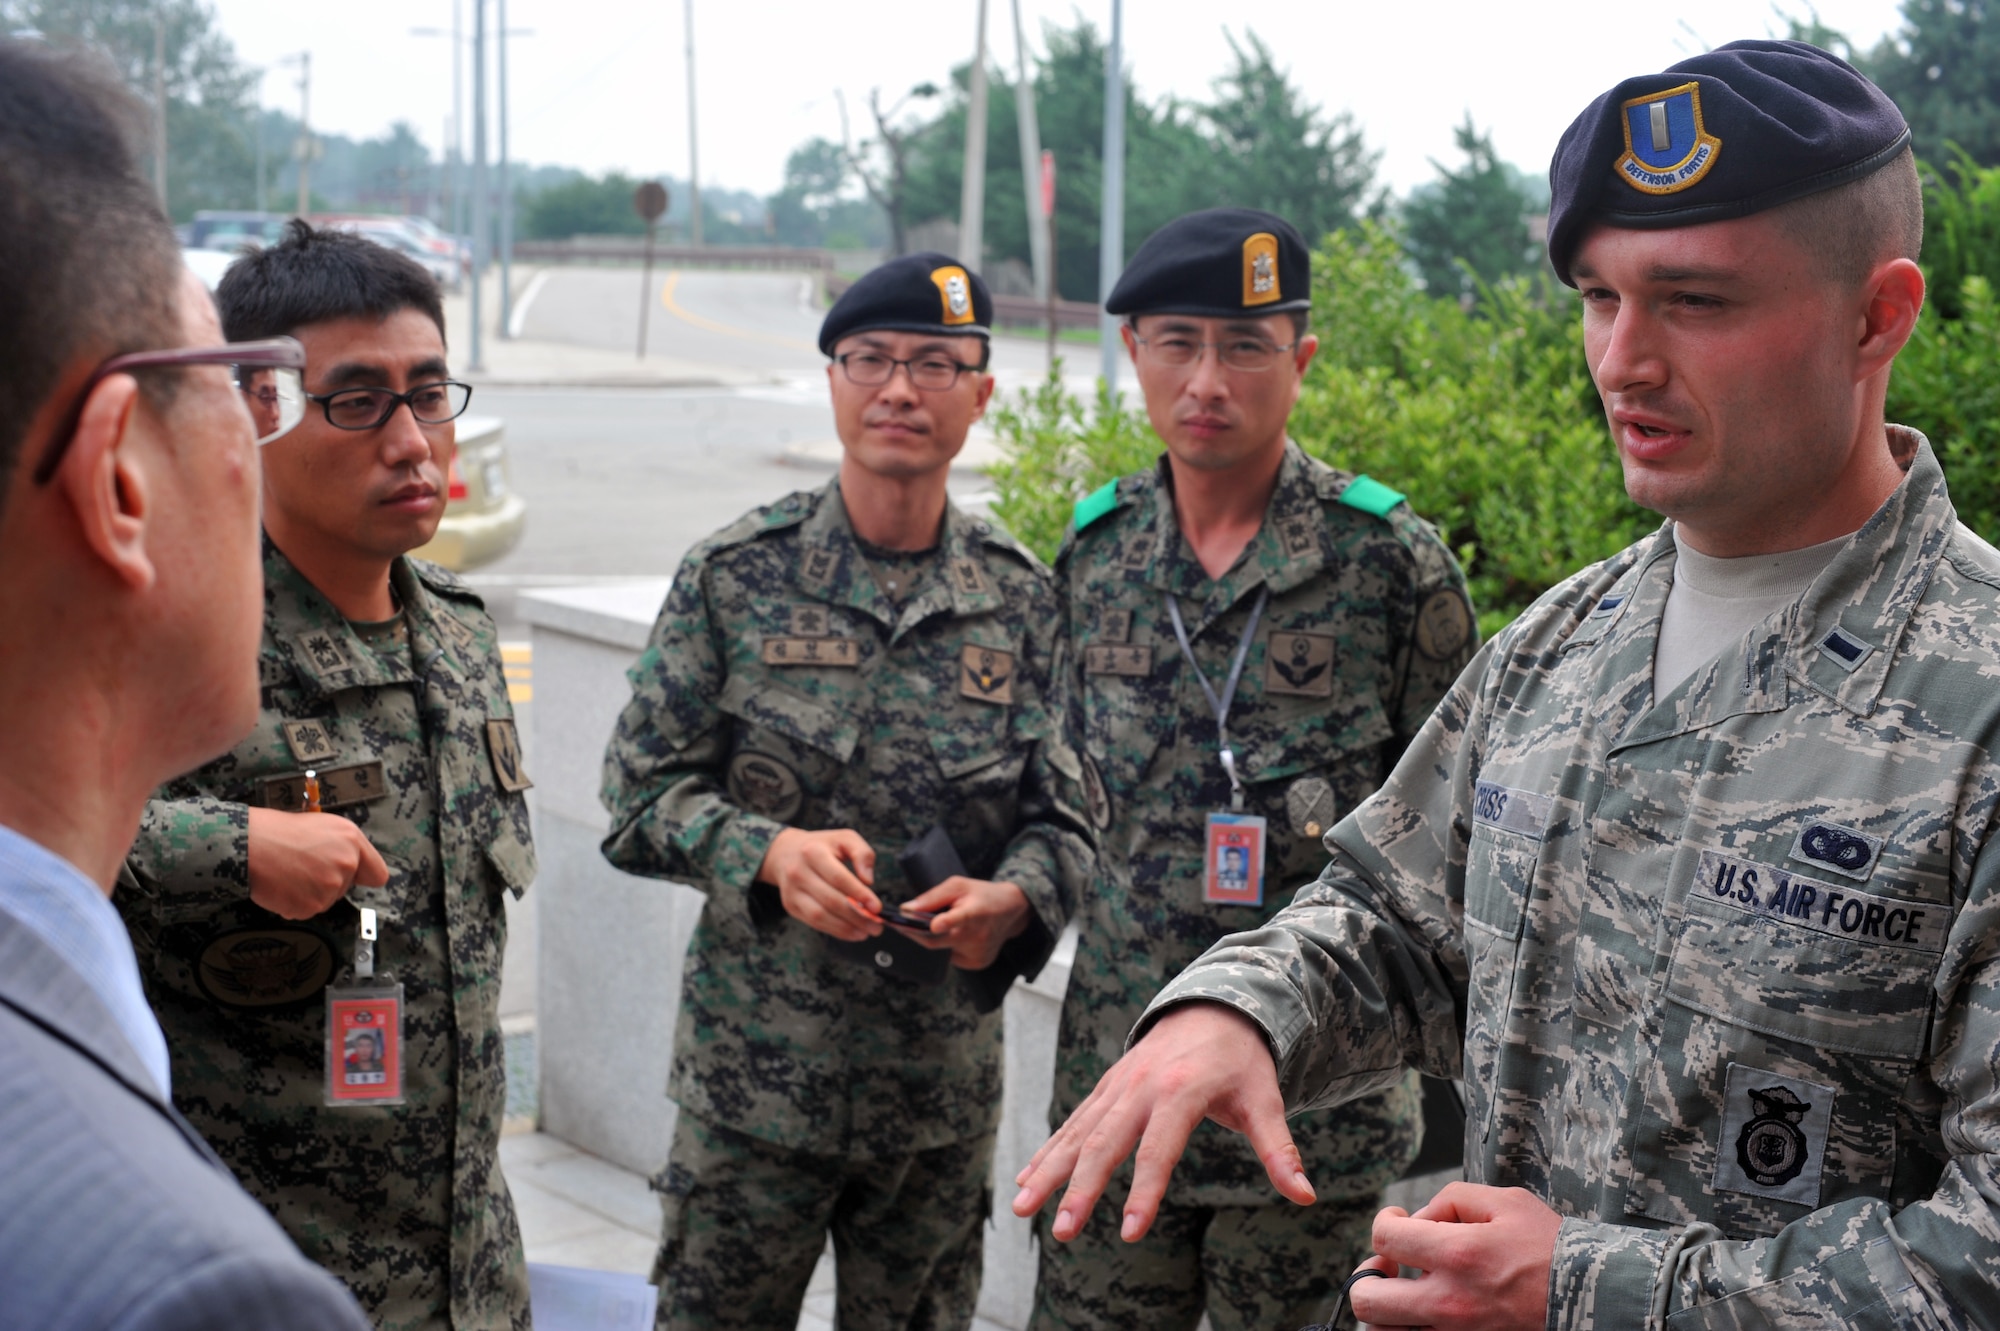 1st Lt. Jordan Criss speaks with members of the 9th Battalion, 51st Infantry Division, Republic of Korea army at Osan Air Base, ROK, July 25, 2013. The ROKA’s special forces unit was on hand to have their first face-to-face meeting with Osan’s defenders. Criss is the air base defense and intelligence officer in charge assigned to the 51st Security Forces Squadron. (U.S. Air Force photo/Senior Airman Siuta B. Ika)